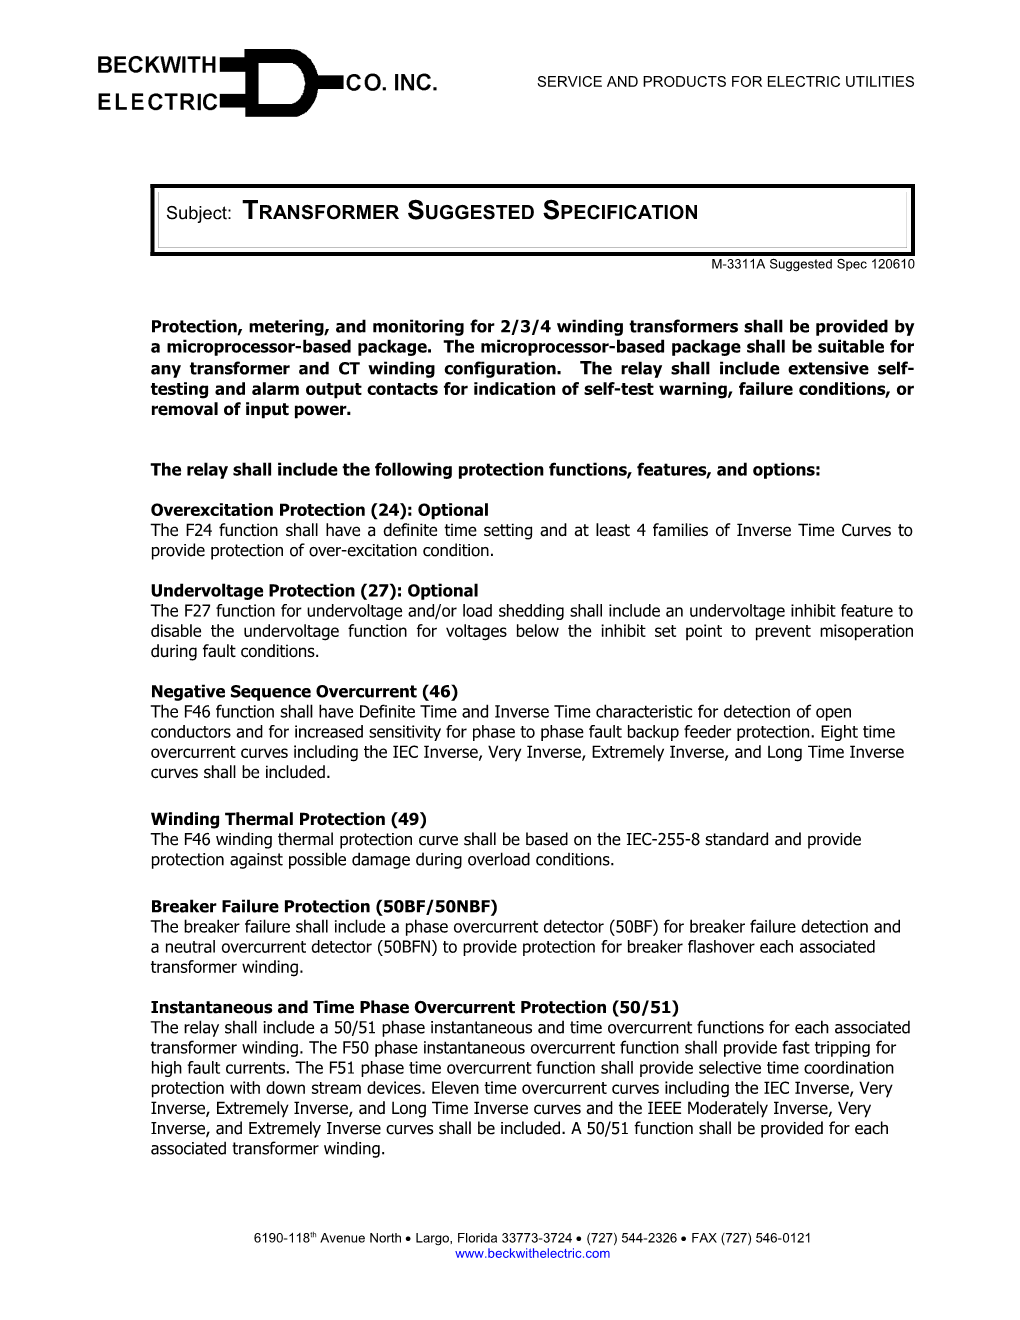 Subject: Transformer Suggested Specification